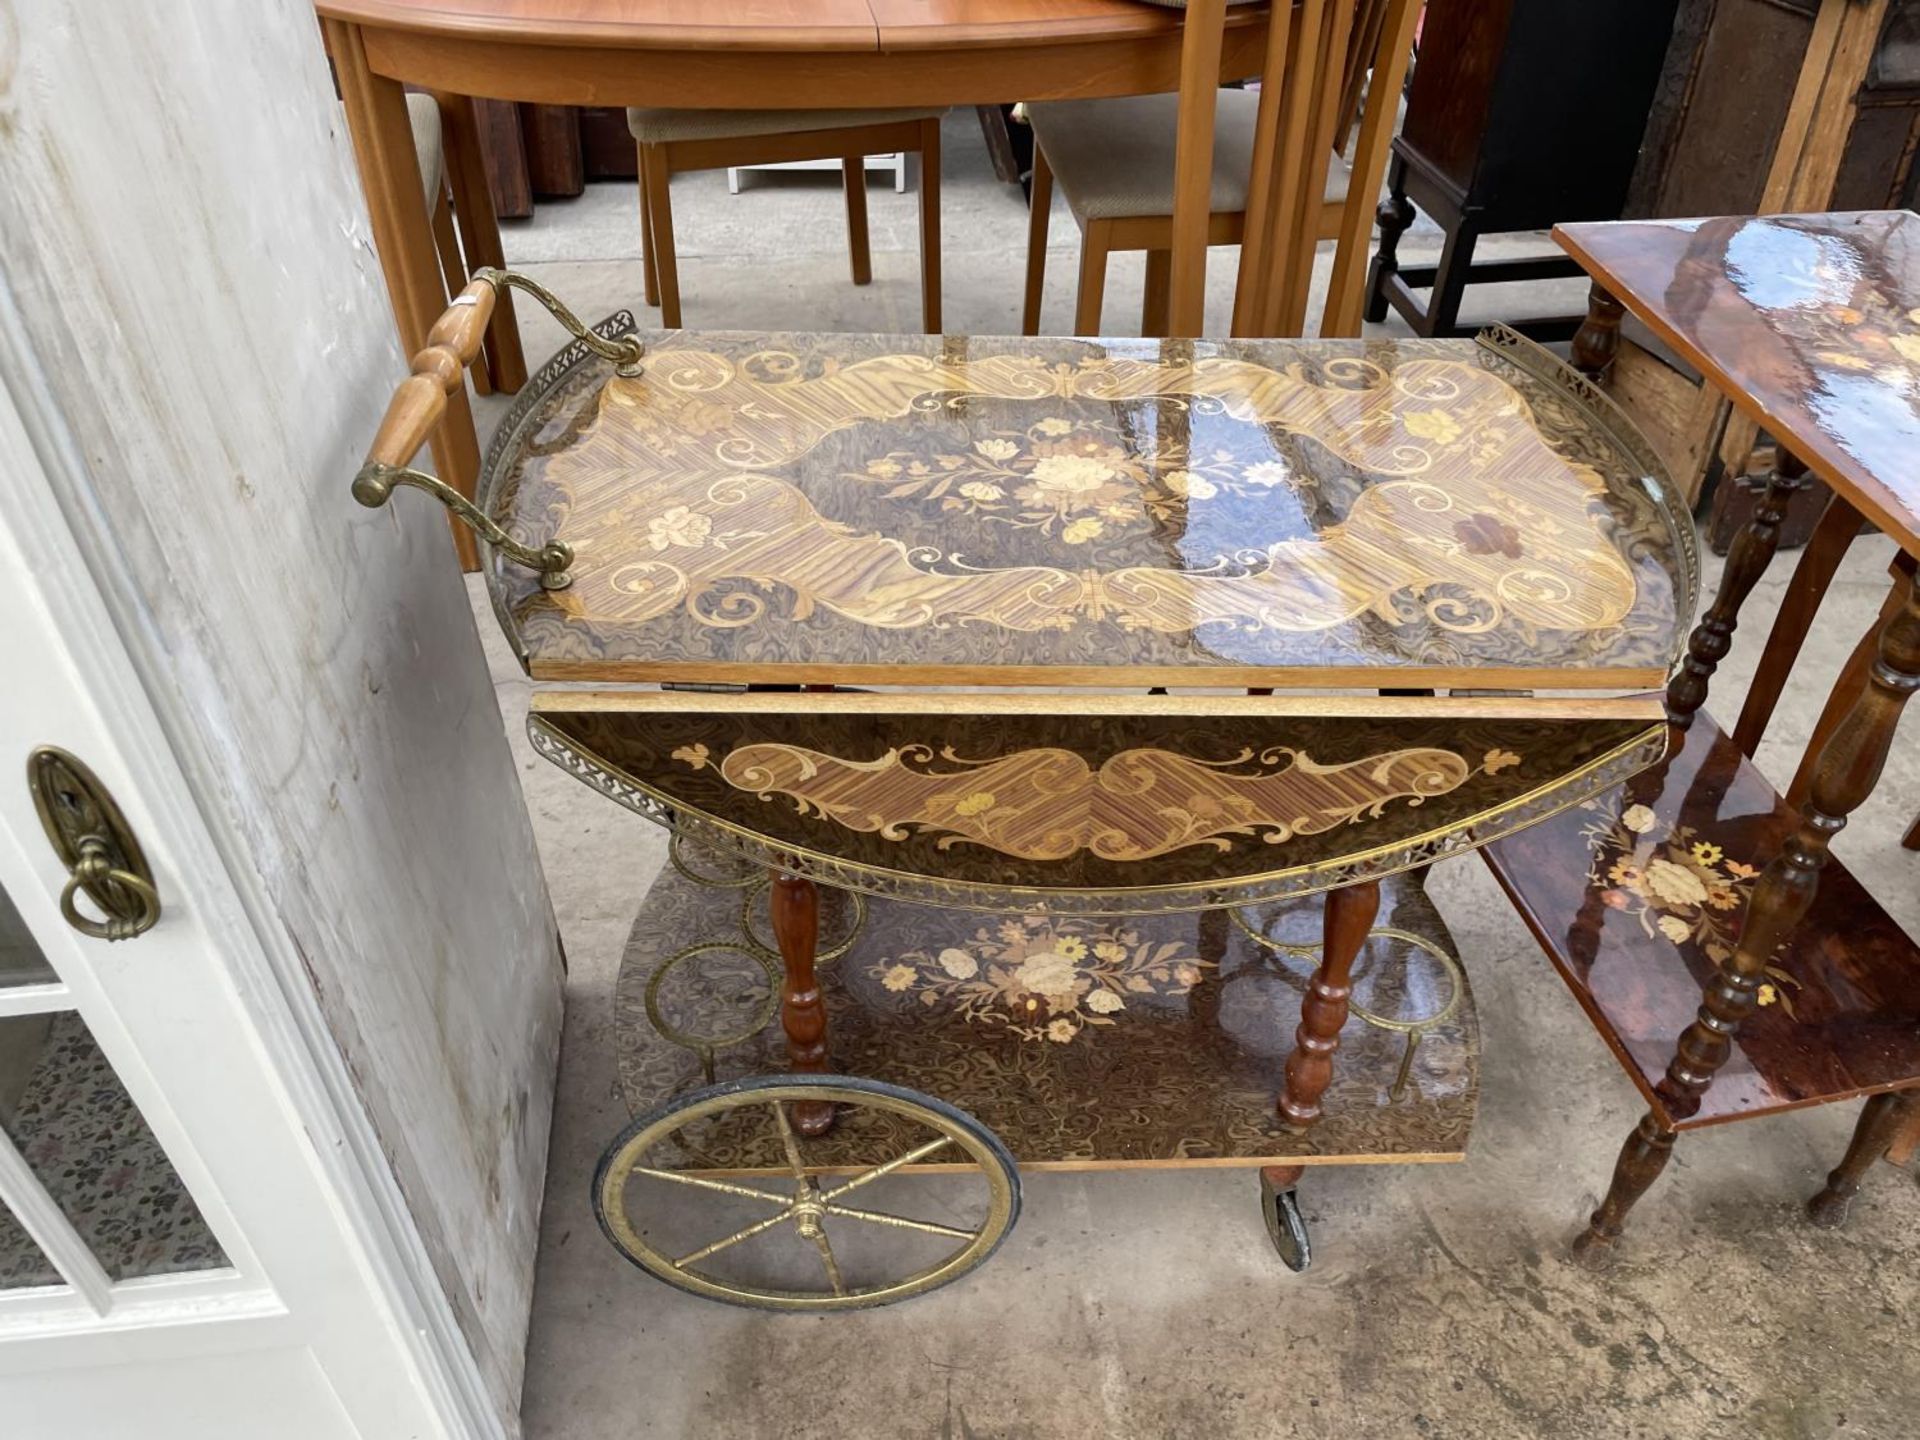 AN ITALIAN STYLE INLAID COCKTAIL TROLLEY, NEST OF THREE TABLES, TWO TIER TABLE AND TWO TIER METAL - Image 2 of 6